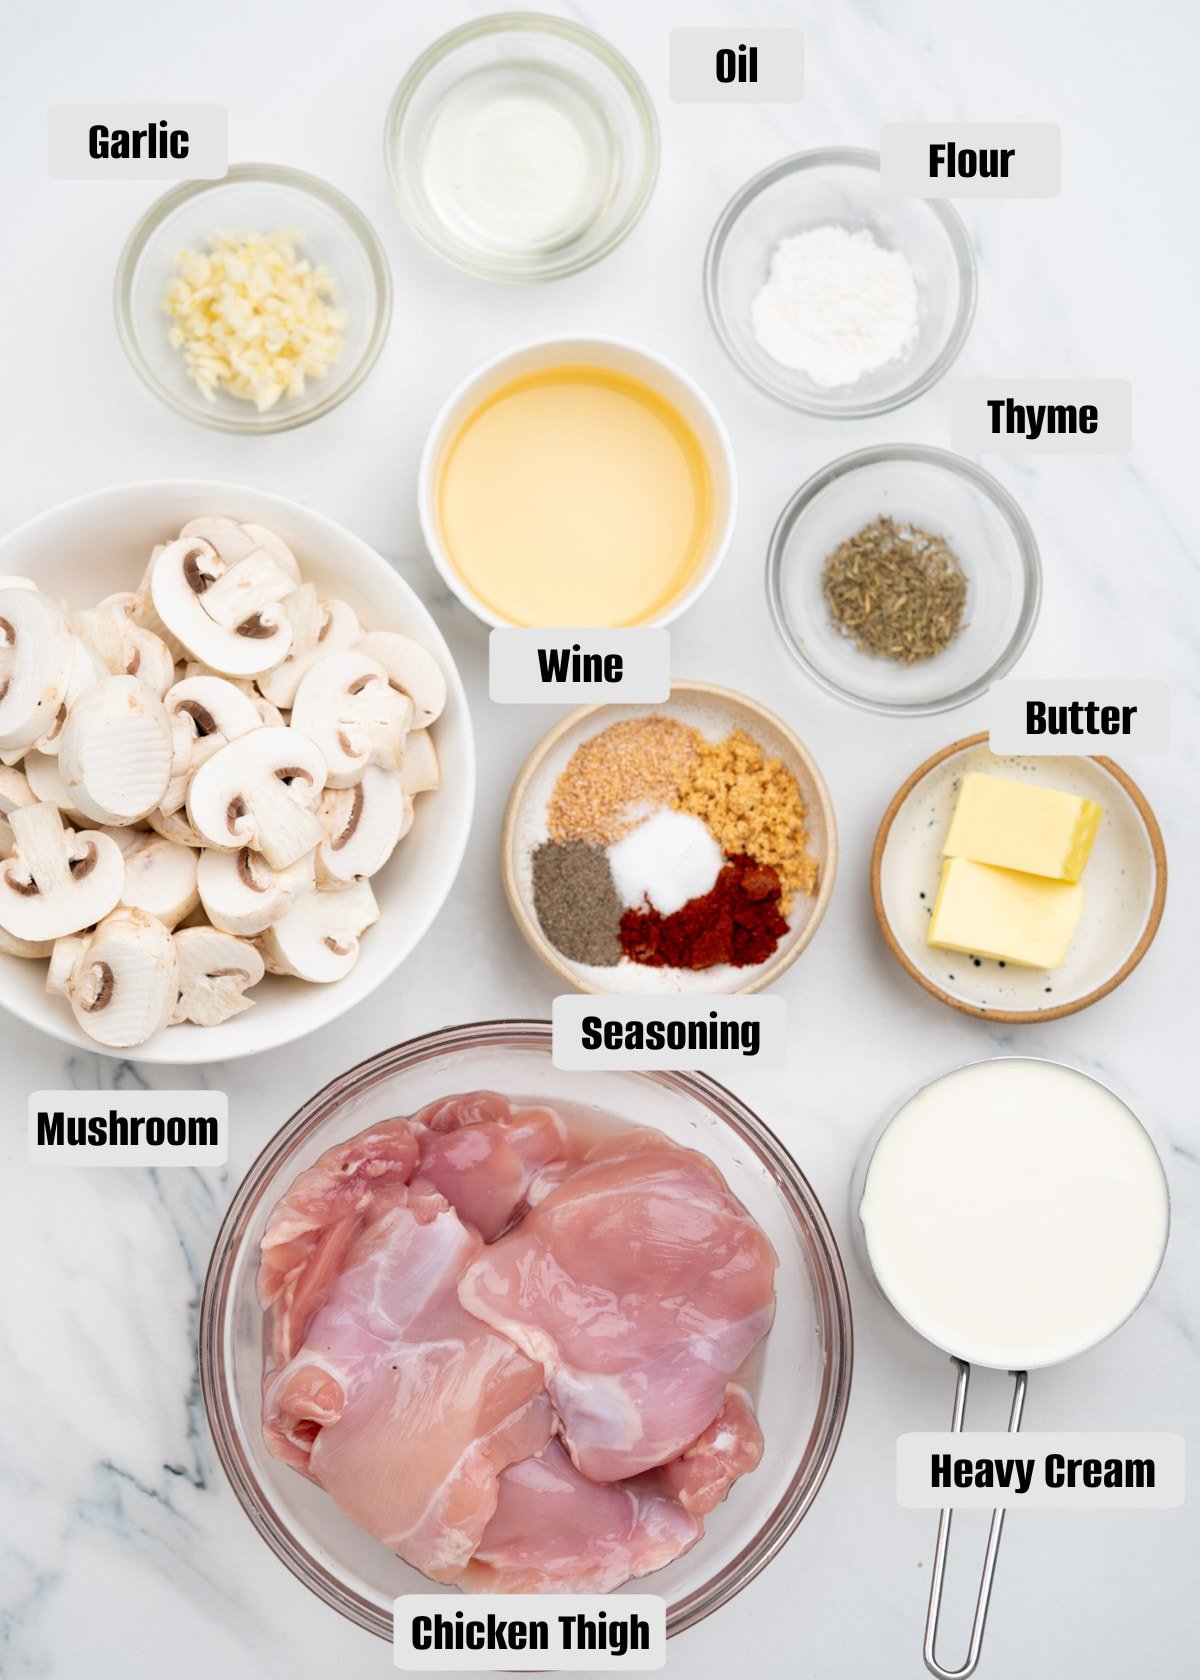 Picture shows list of ingredients required to make chicken thigh in mushroom sauce.